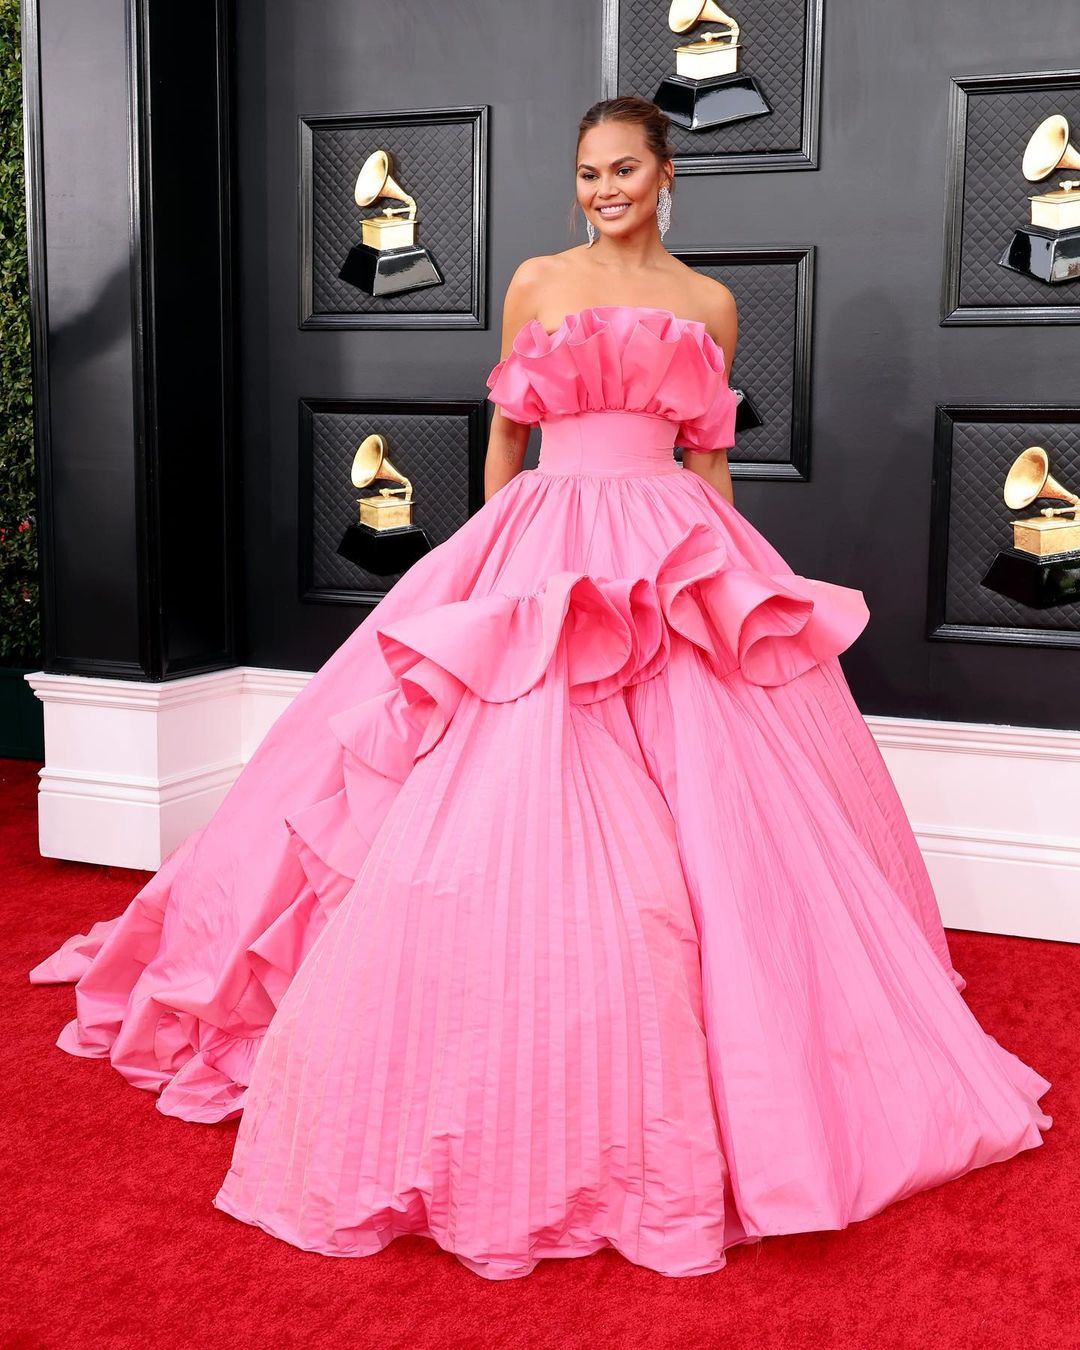 Chrissy Teigen gve princess vibes in the ballroom-style gown by Nicole Felicia